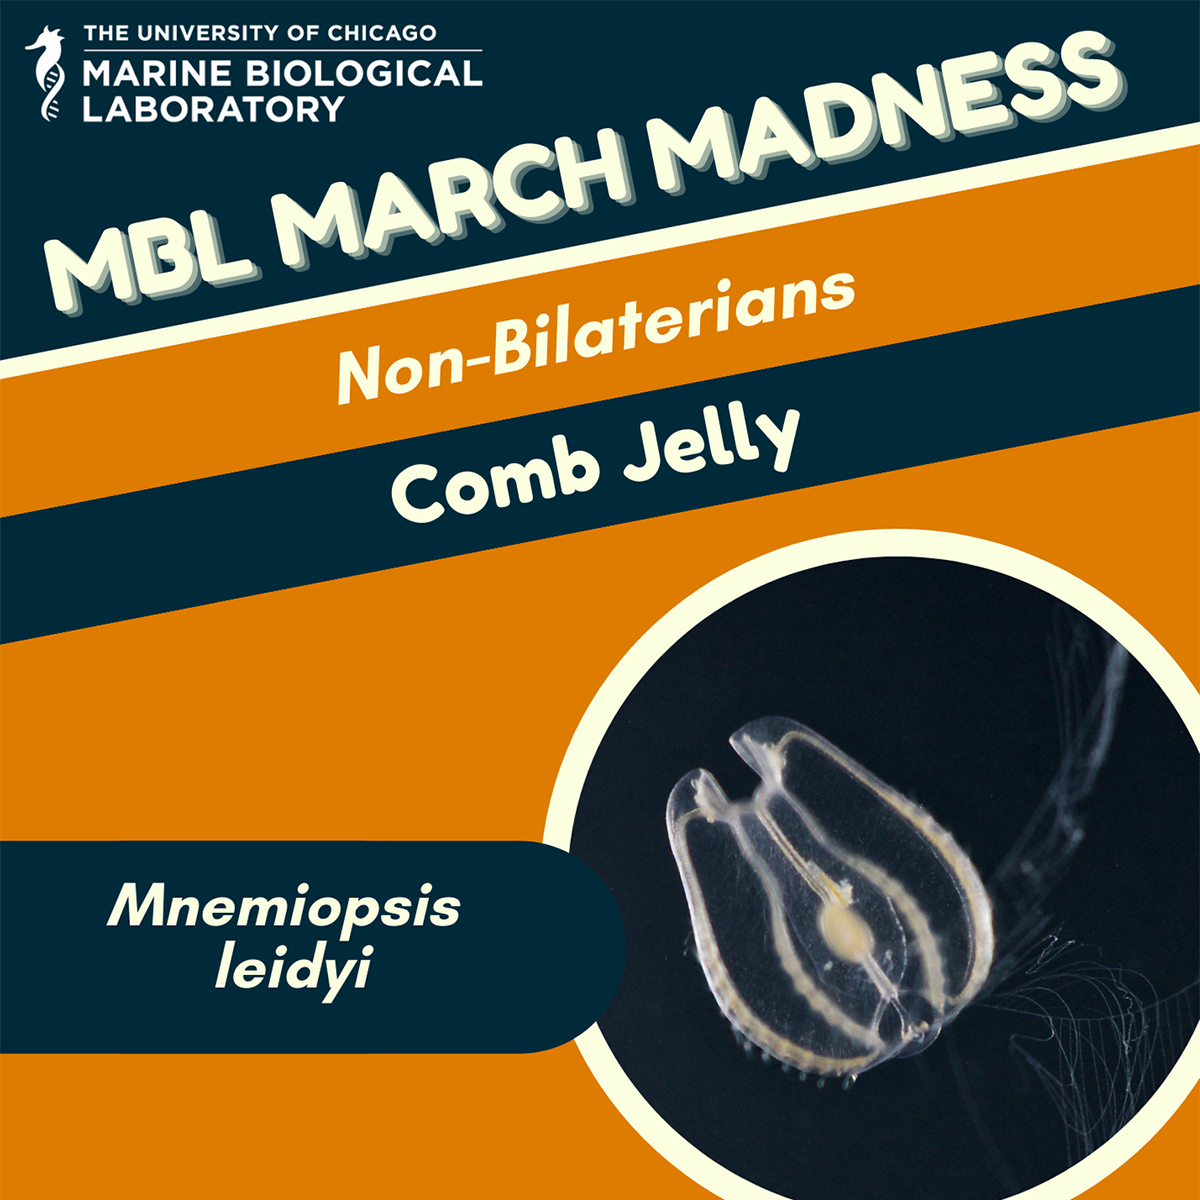 MBL March Madness: Comb Jelly (Mnemiopsis leidyi)